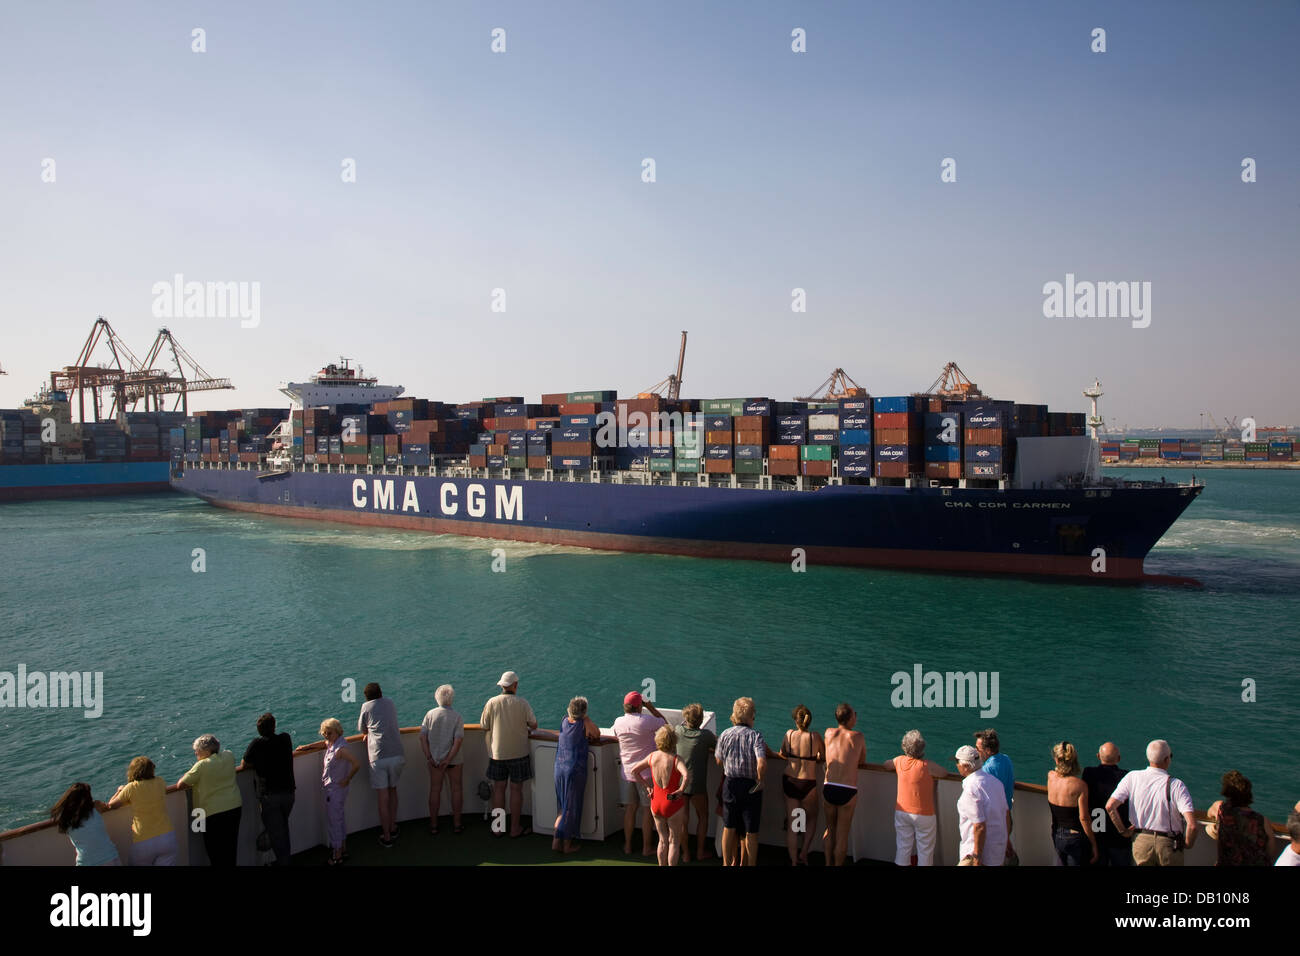 Tourists observe activities in the busy port of Jeddah, Saudi Arabia. Stock Photo